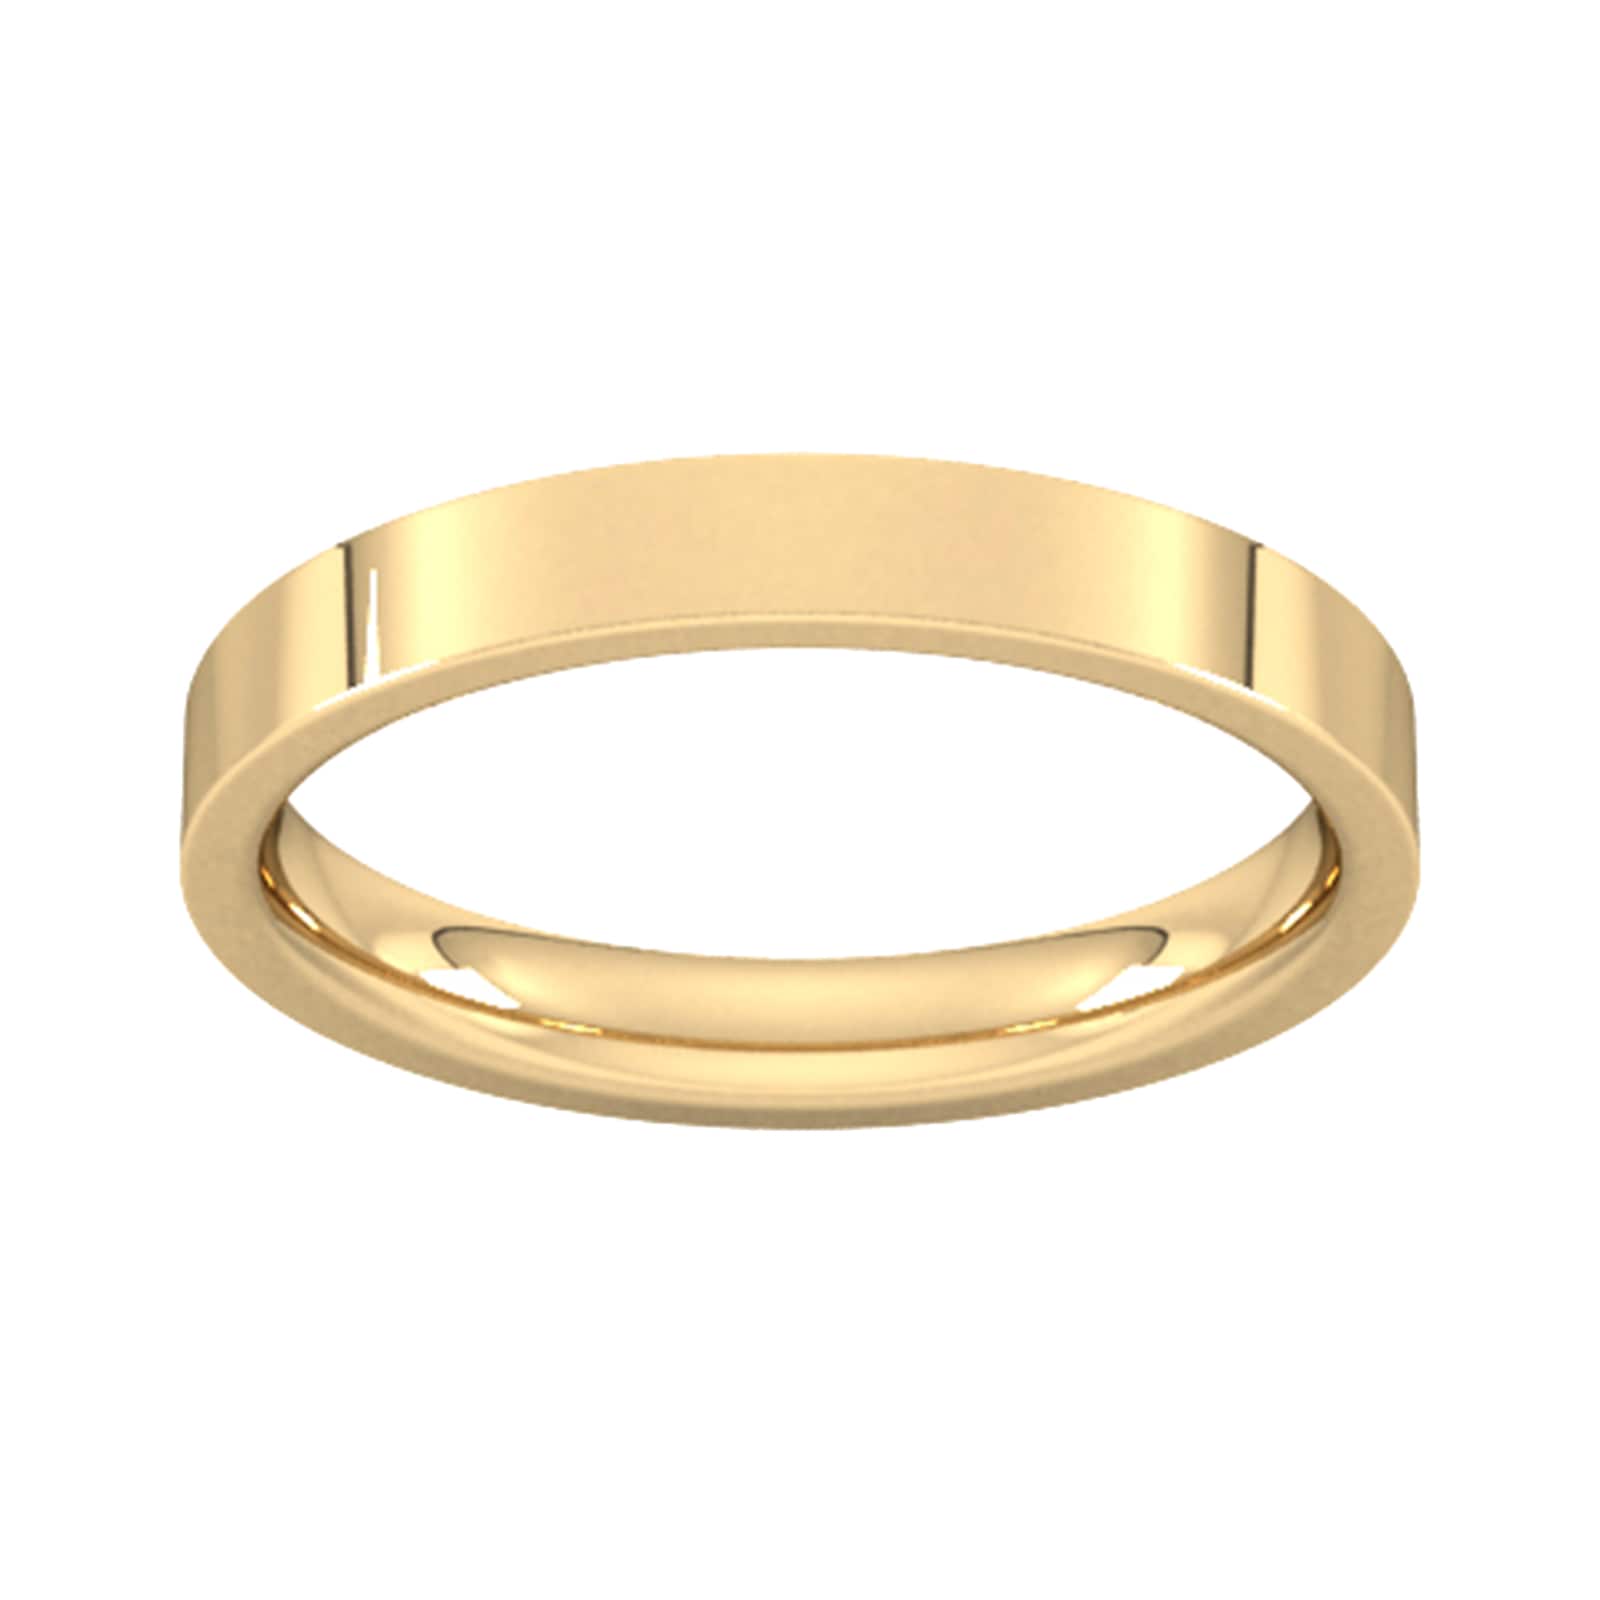 3mm Flat Court Heavy Wedding Ring In 9 Carat Yellow Gold - Ring Size M